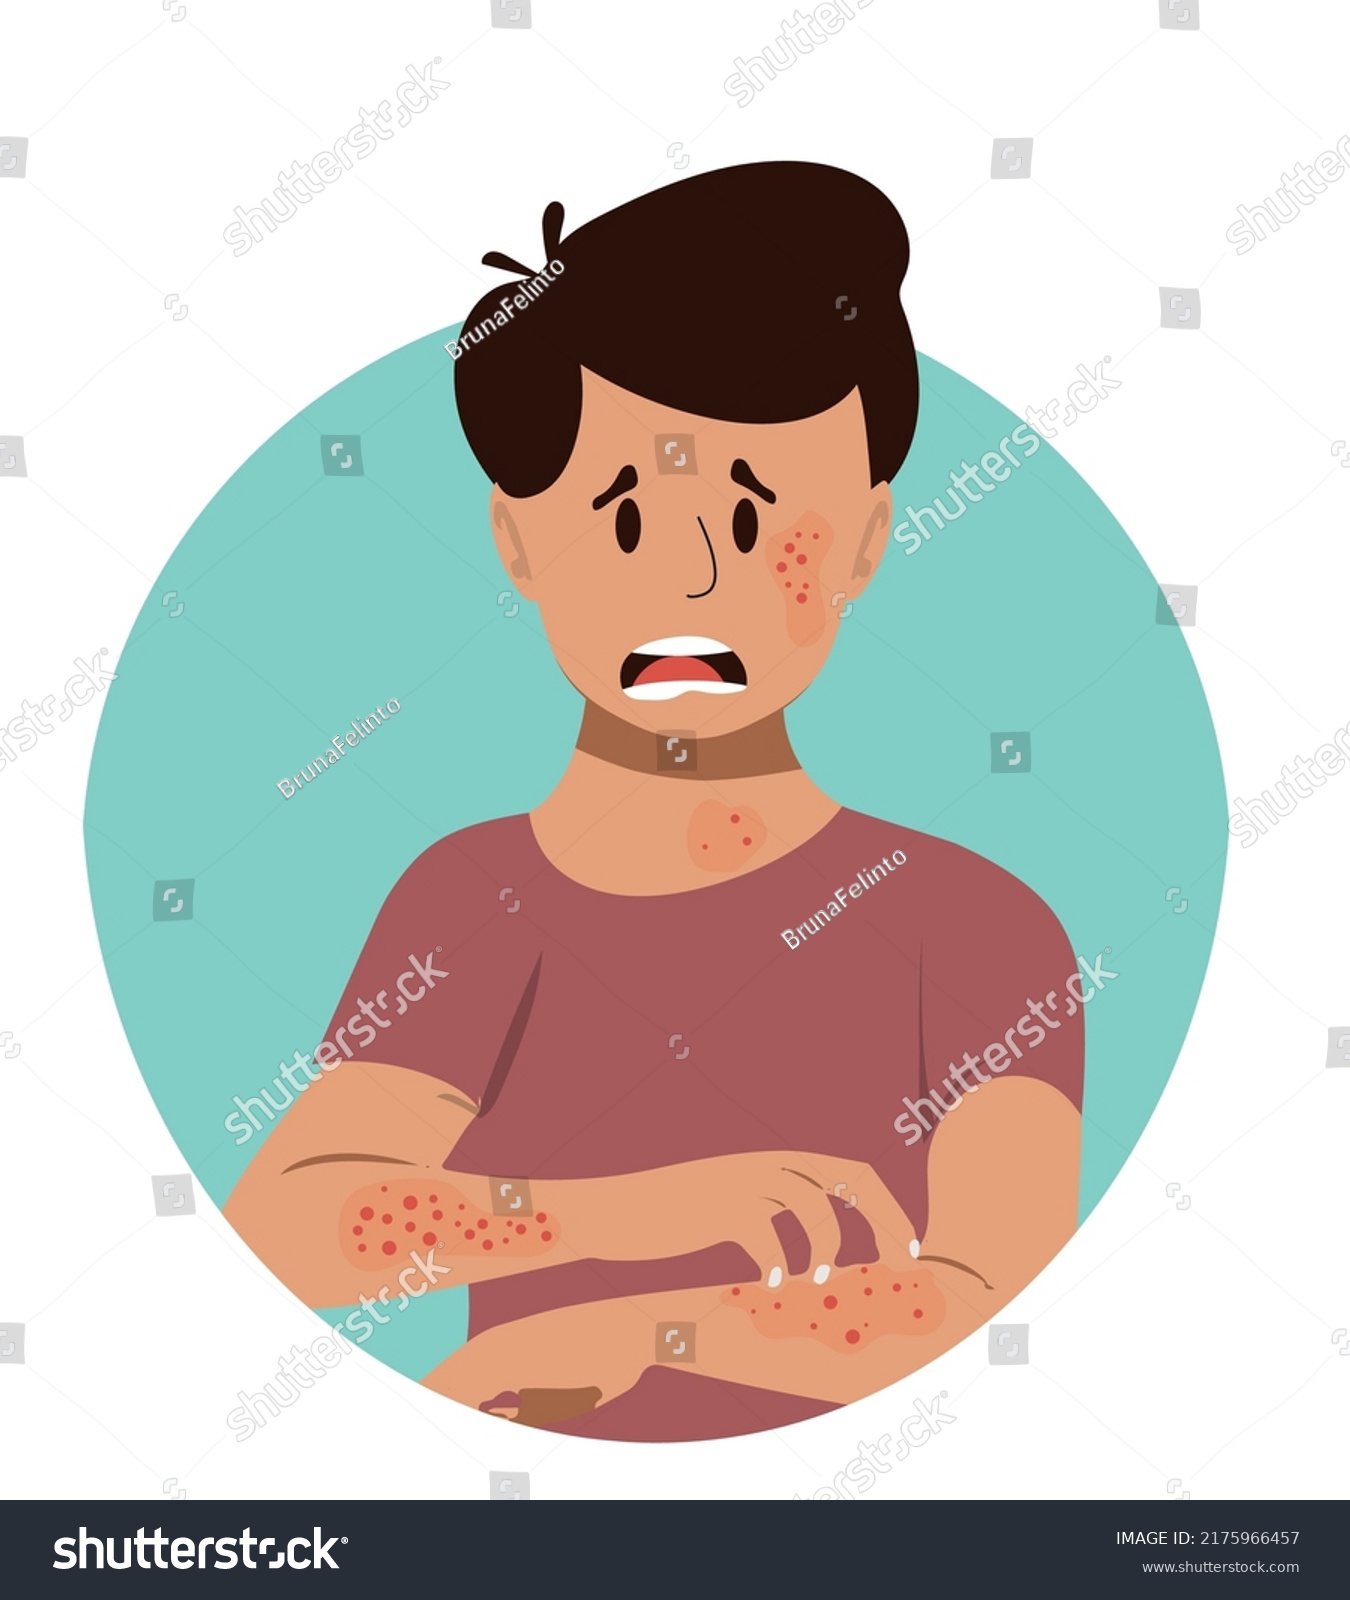 Cartoon Boy Scratching His Arms Decorated Stock Vector (Royalty Free ...